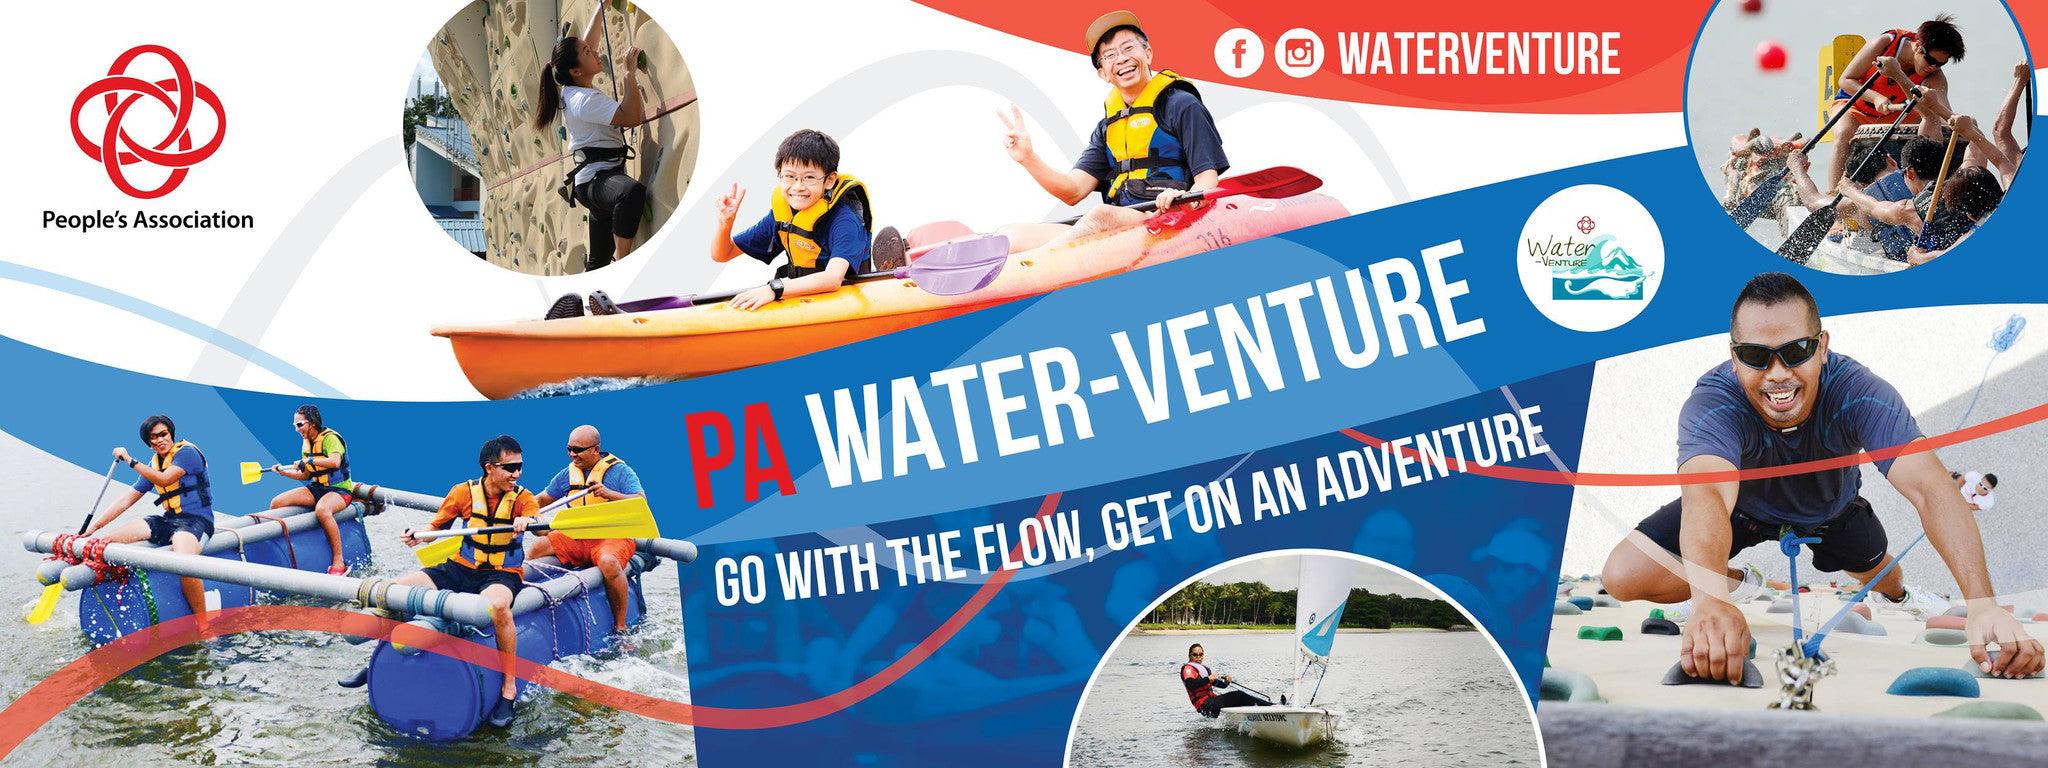 Things to do this Weekend: Free Pedal Boat @ Marina Bay!